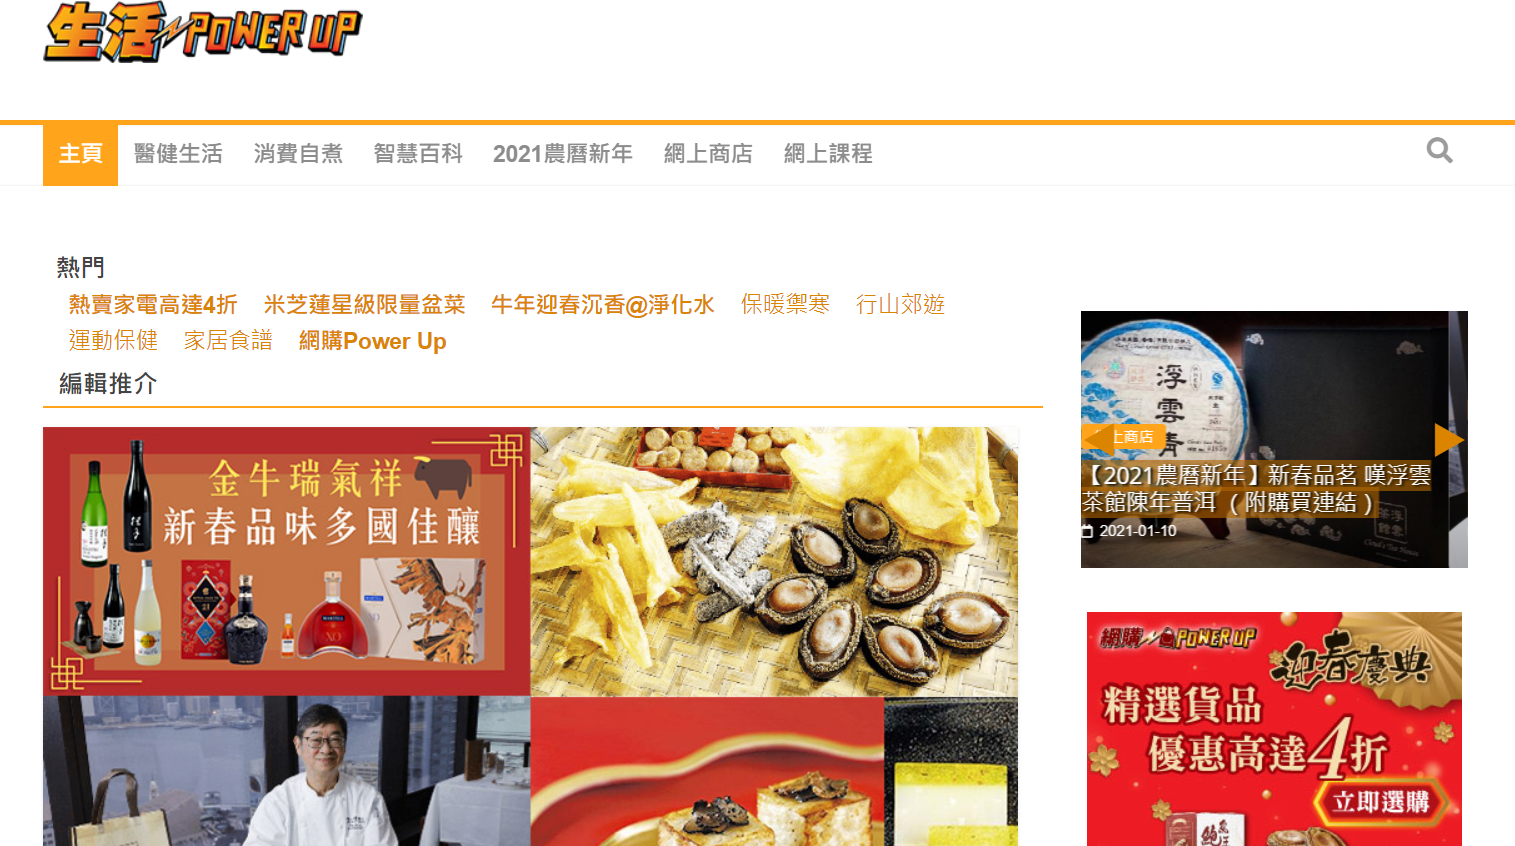 Leading Chinese newspaper, Ming Pao Daily set up an e-commerce platform, Power Up to earn more revenue. 